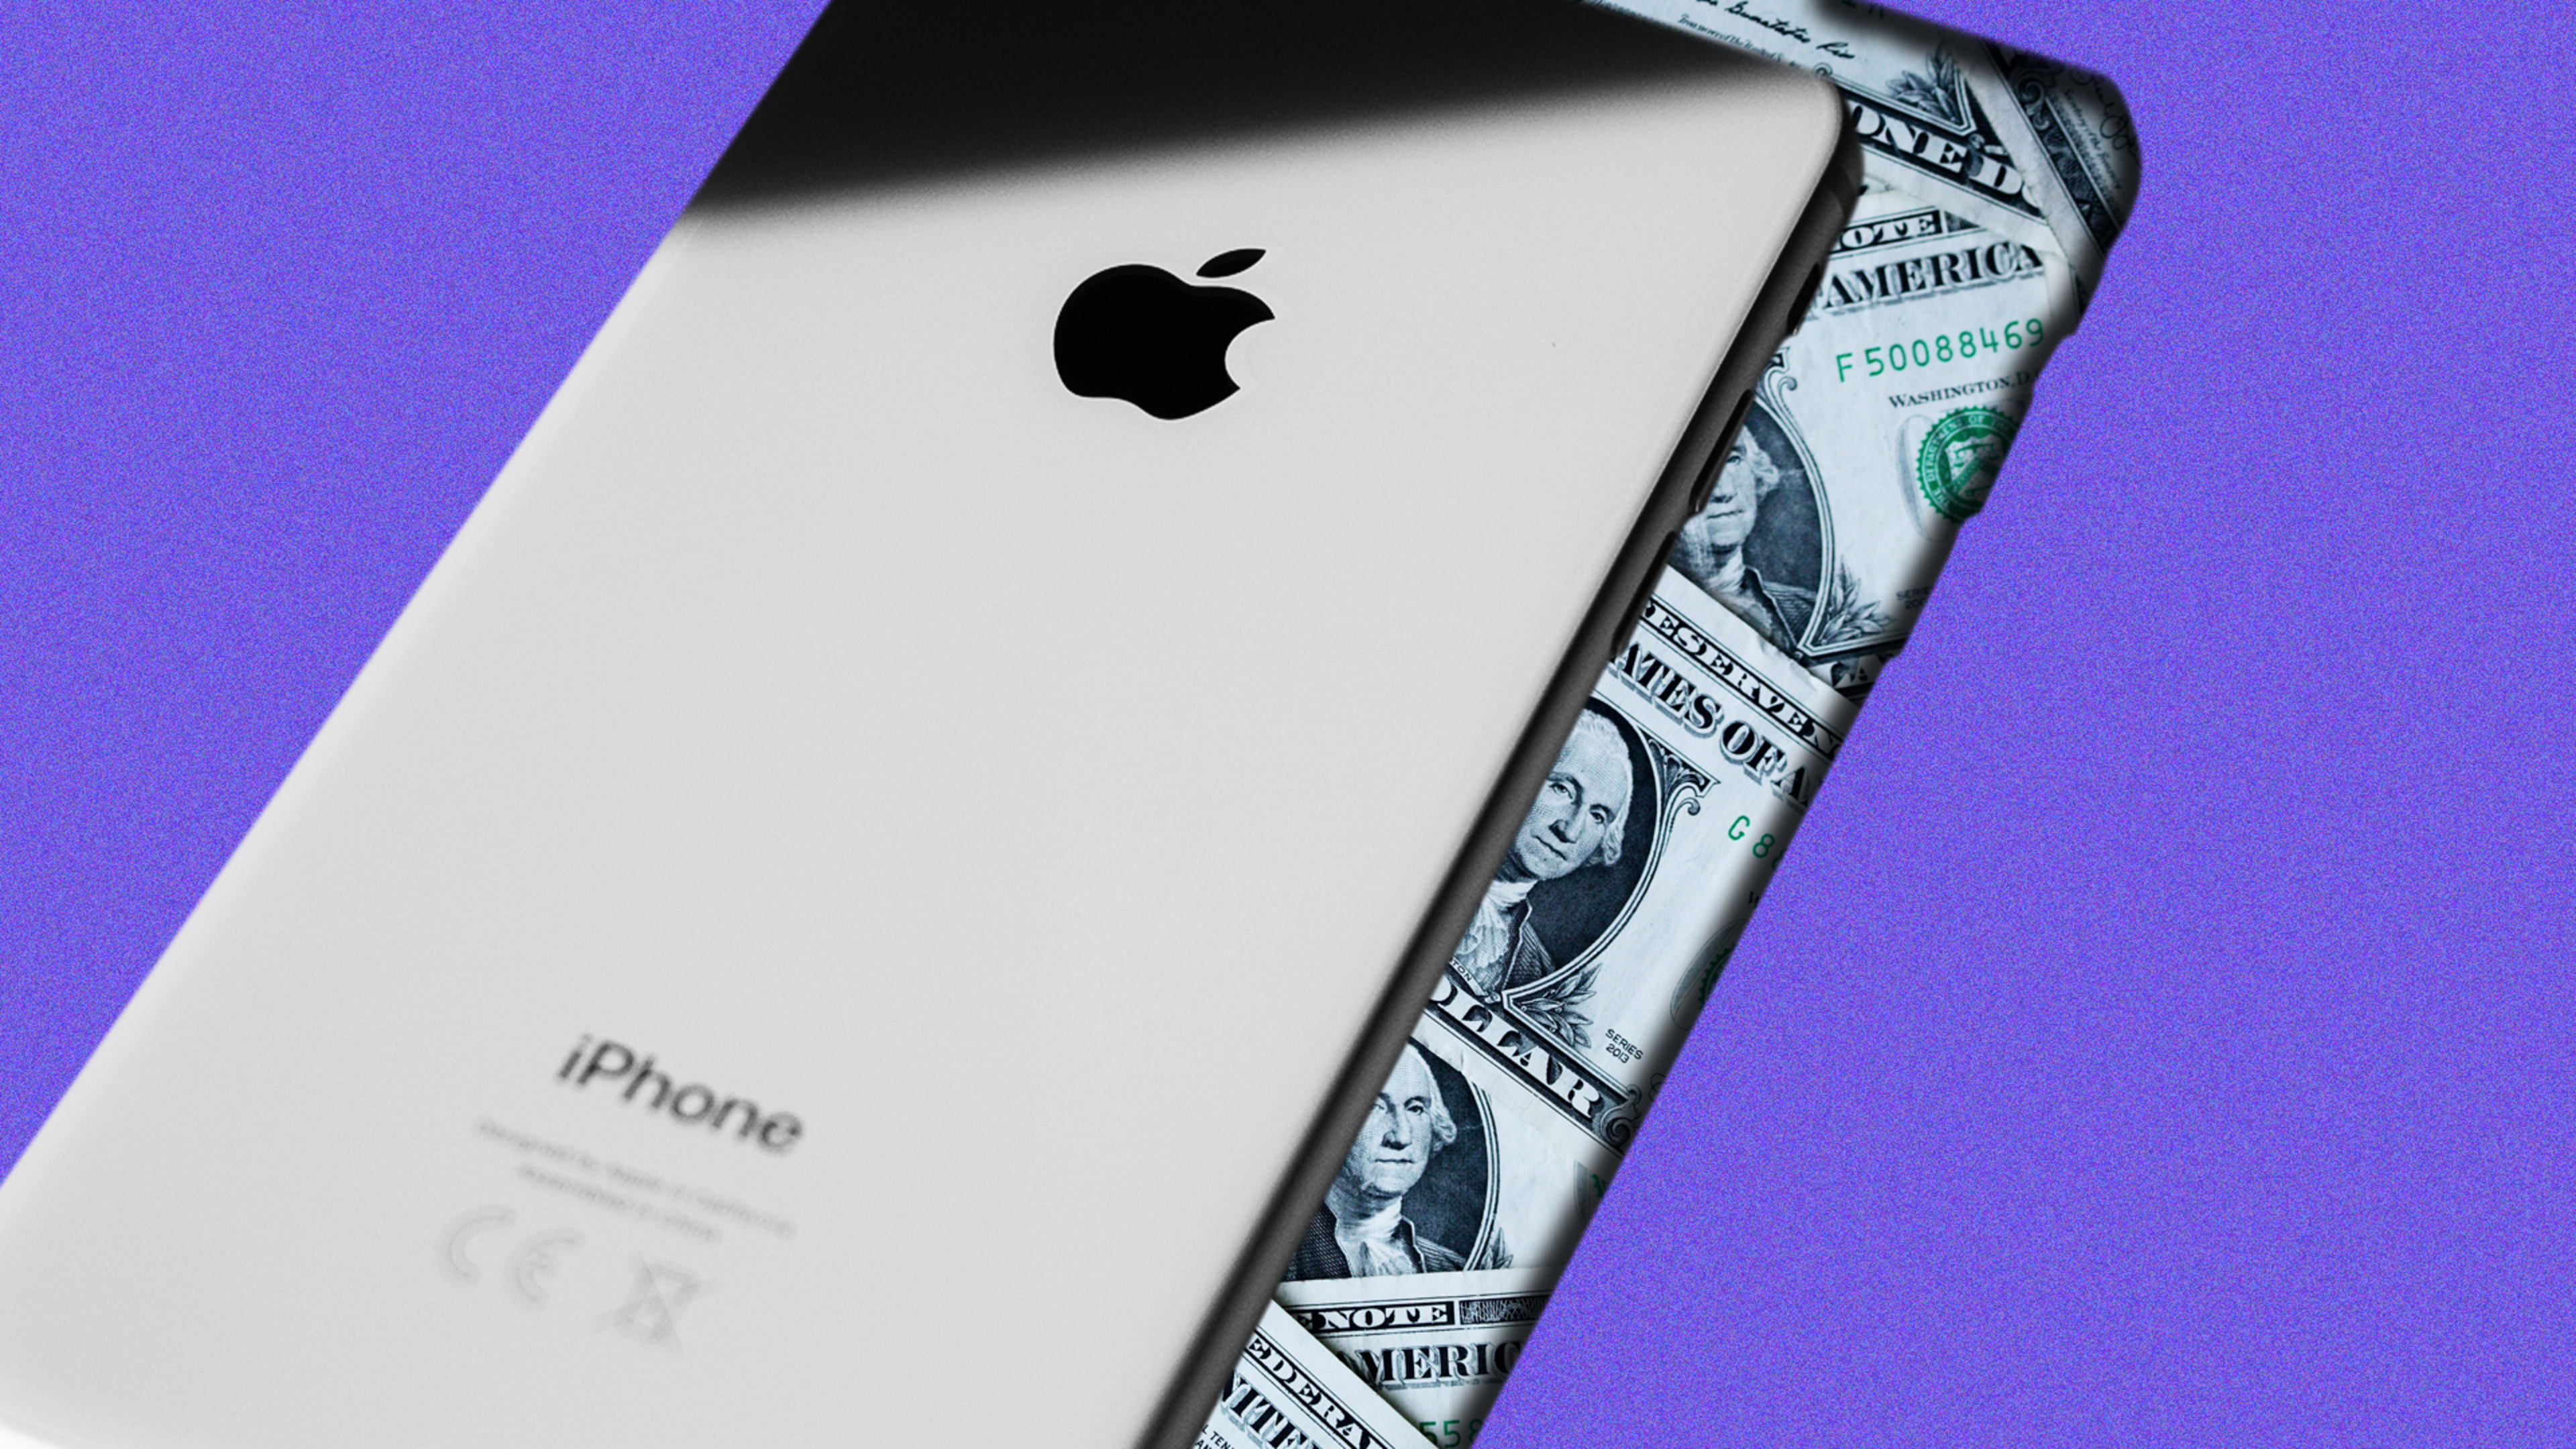 A new low-cost iPhone is coming in March—and it’s a smart move for Apple